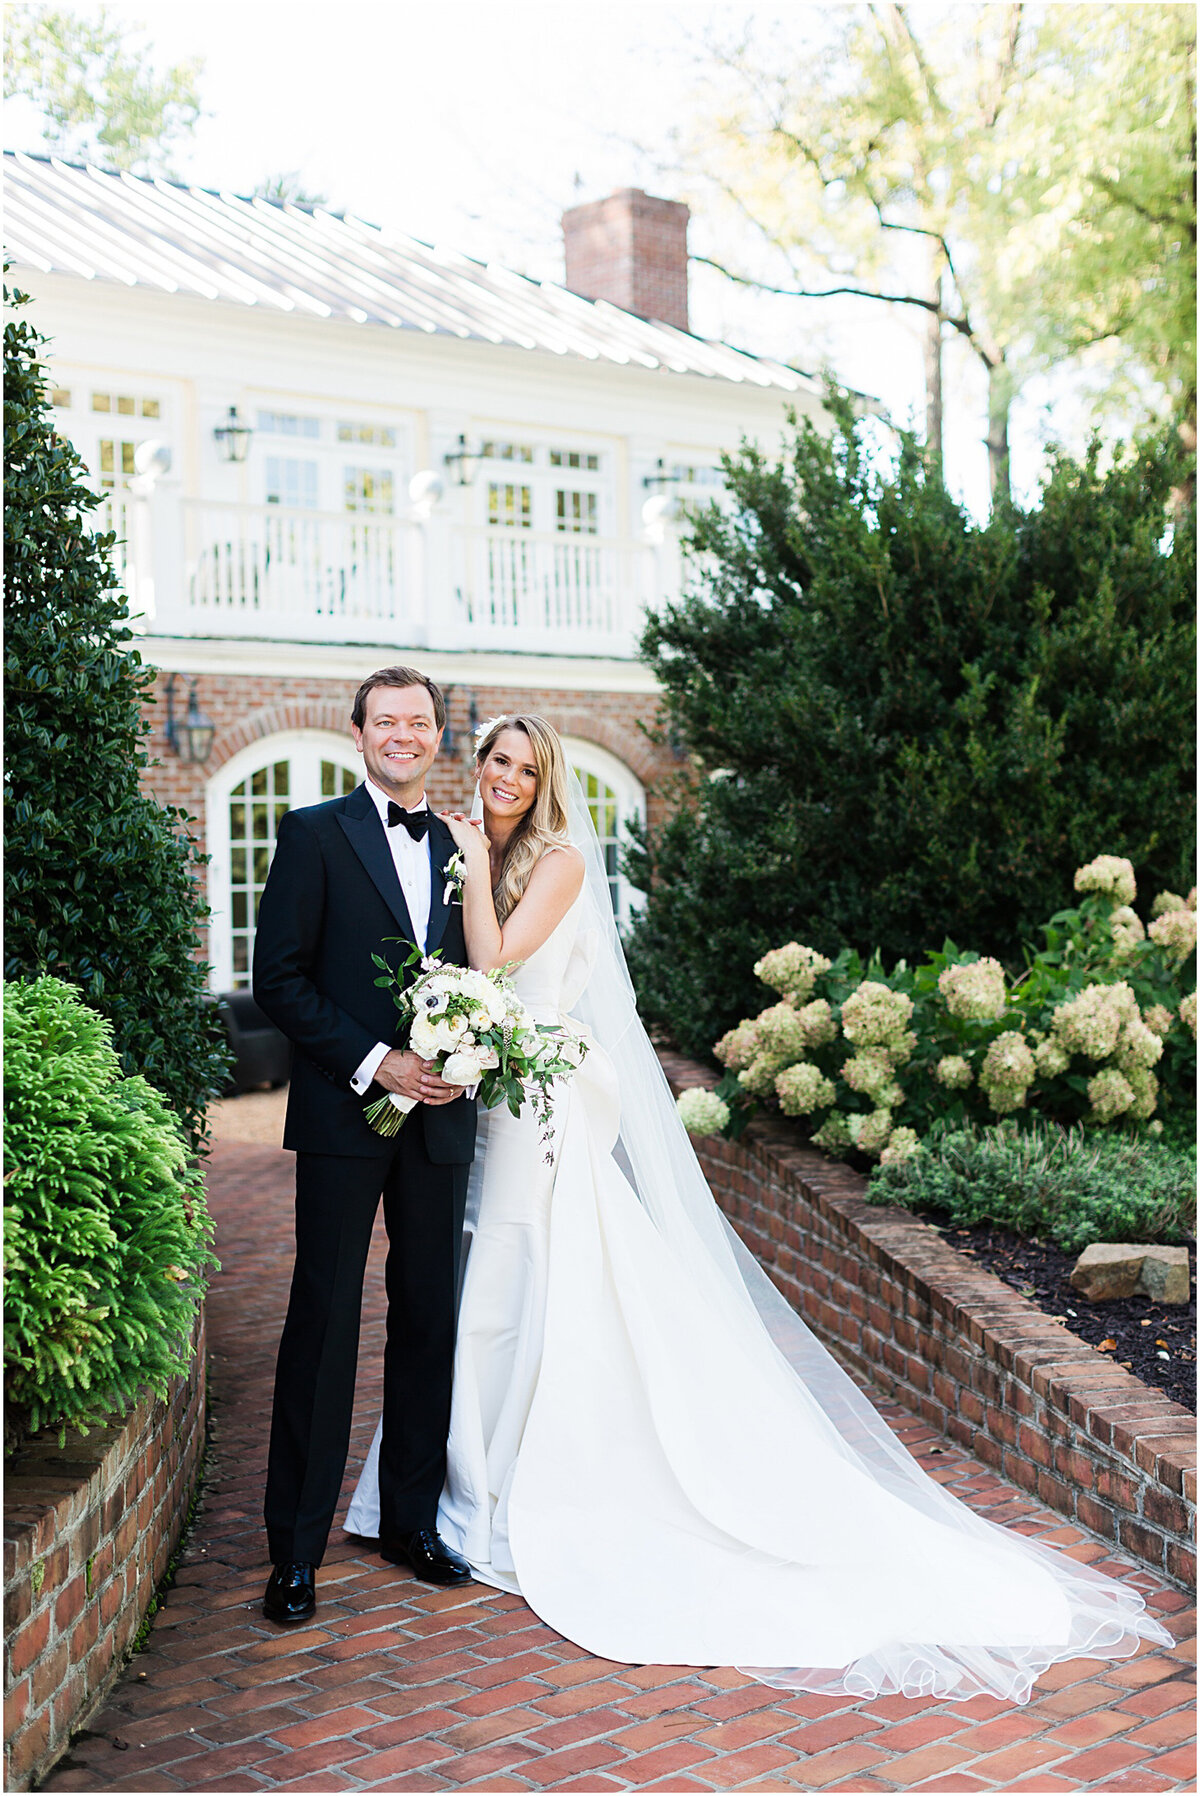 Classic southern wedding bride and groom